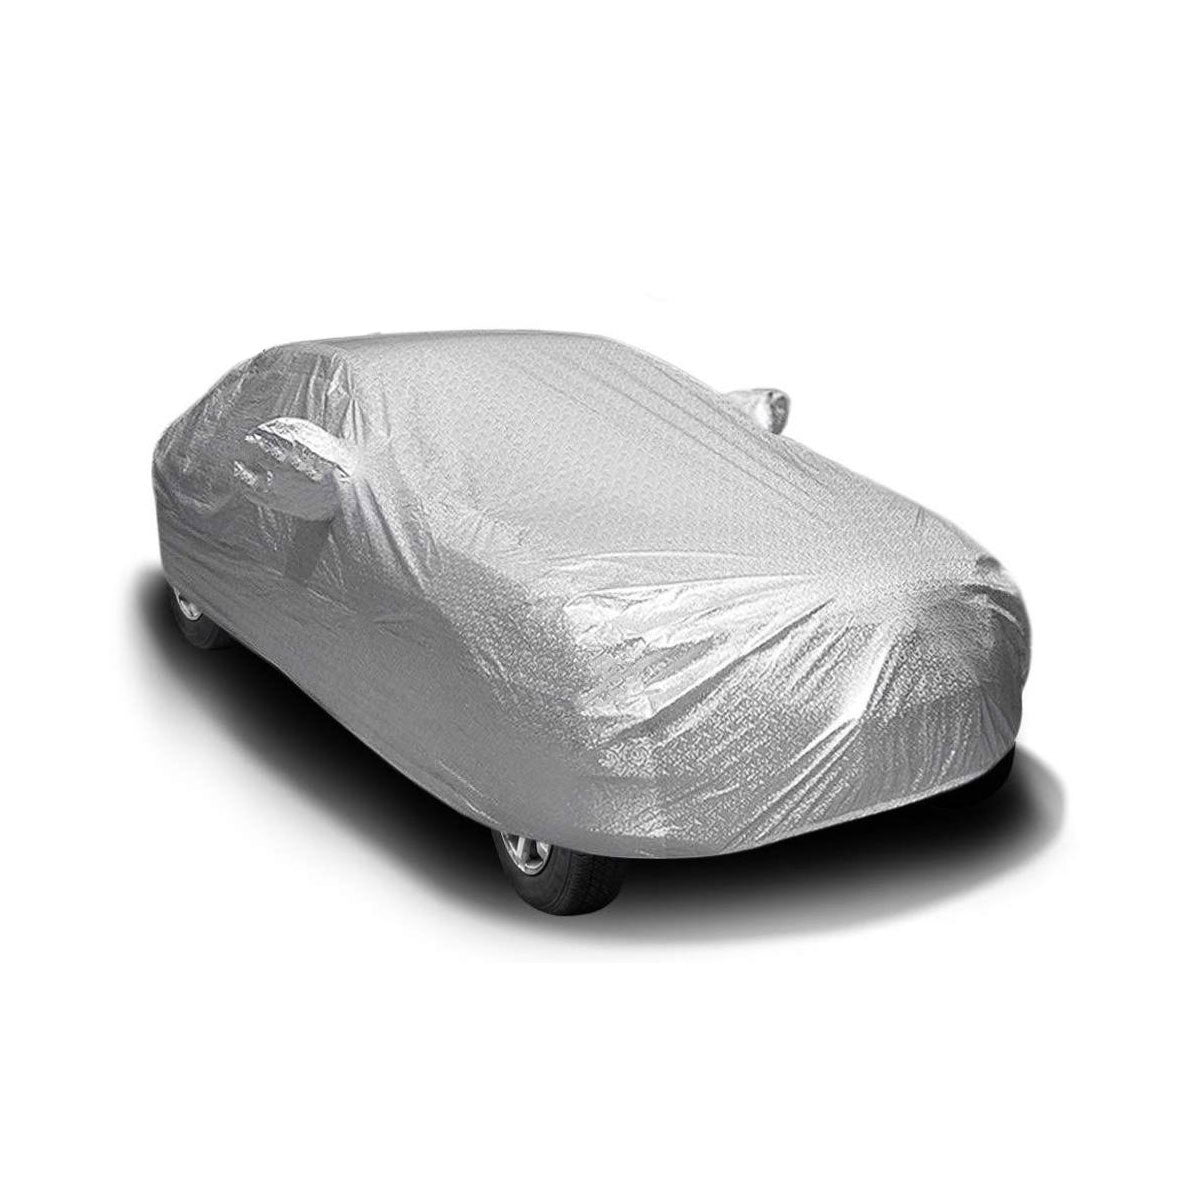 Oshotto Spyro Silver Anti Reflective, dustproof and Water Proof Car Body Cover with Mirror Pockets For Honda Civic